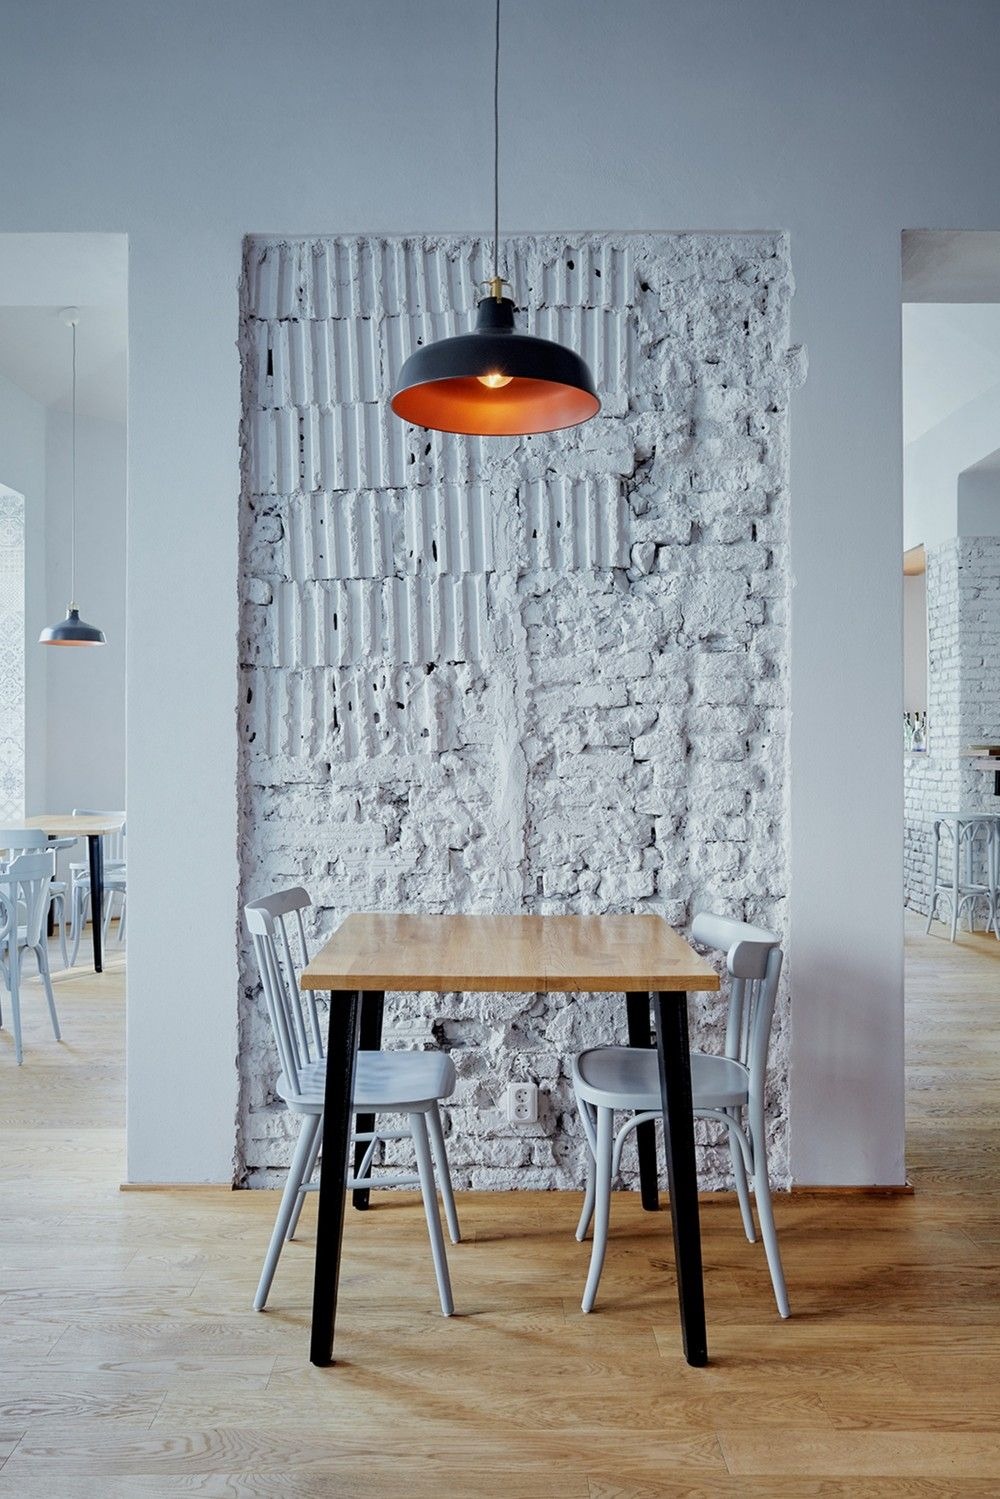 The Accent Wall for a Grunge Dining Room